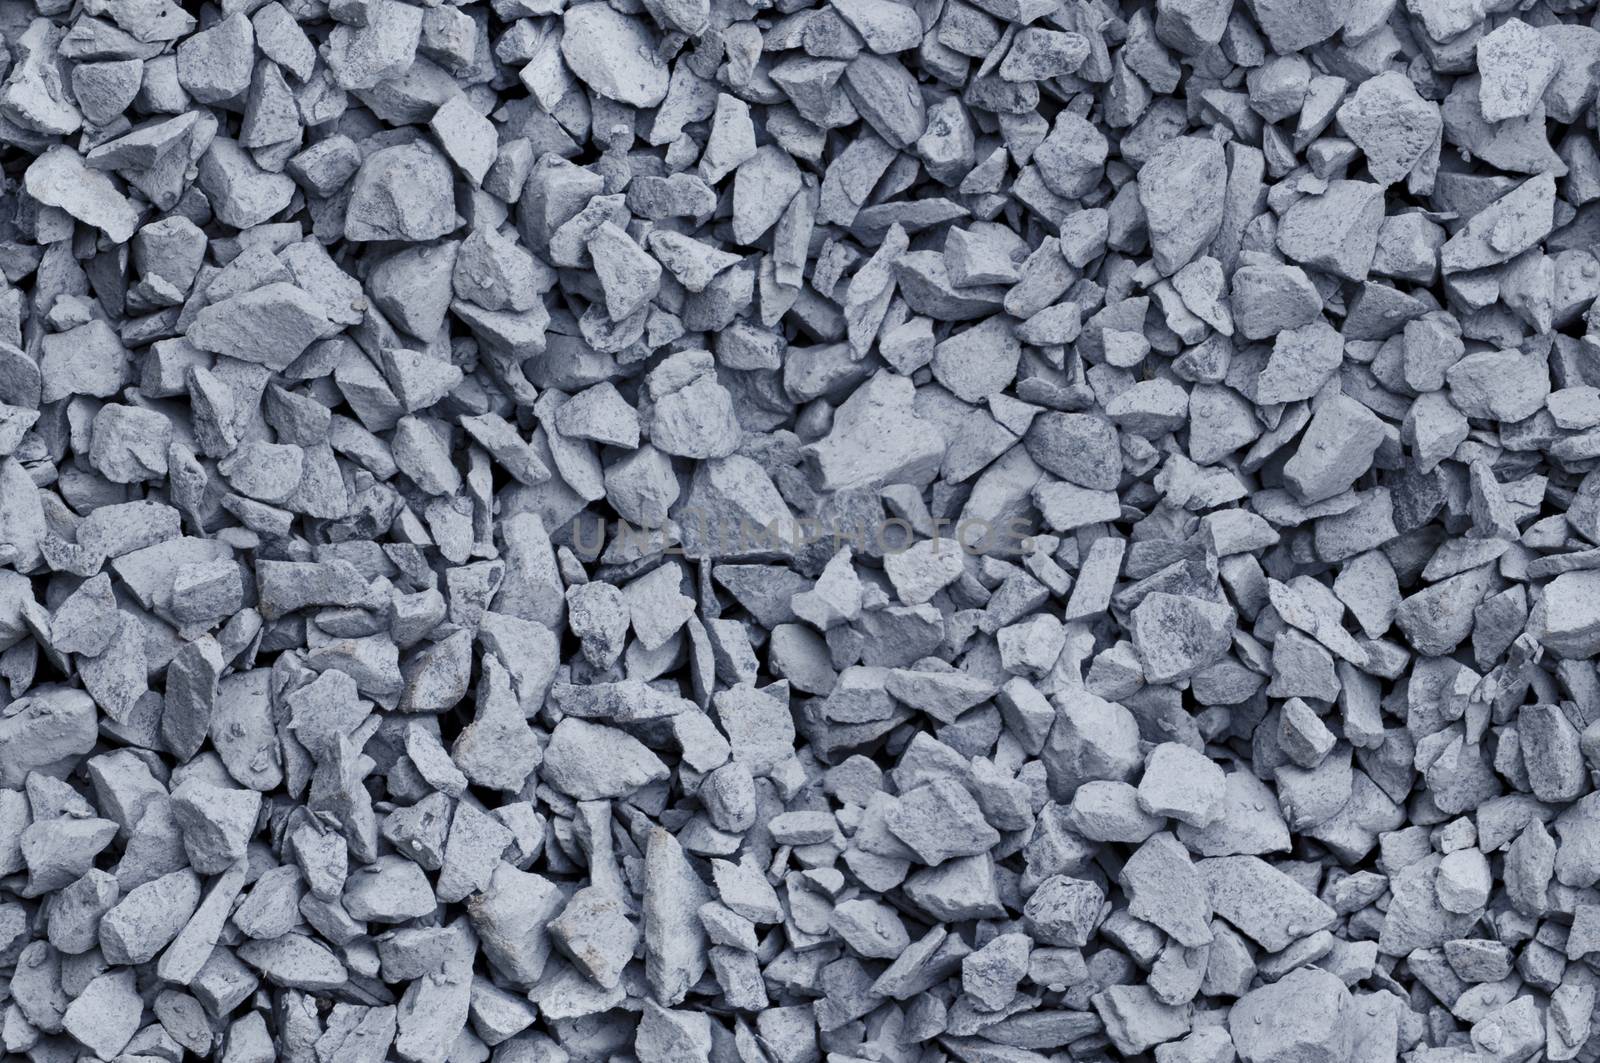 Bluish Gray gravel used for construction fill - seamless backgro by Balefire9